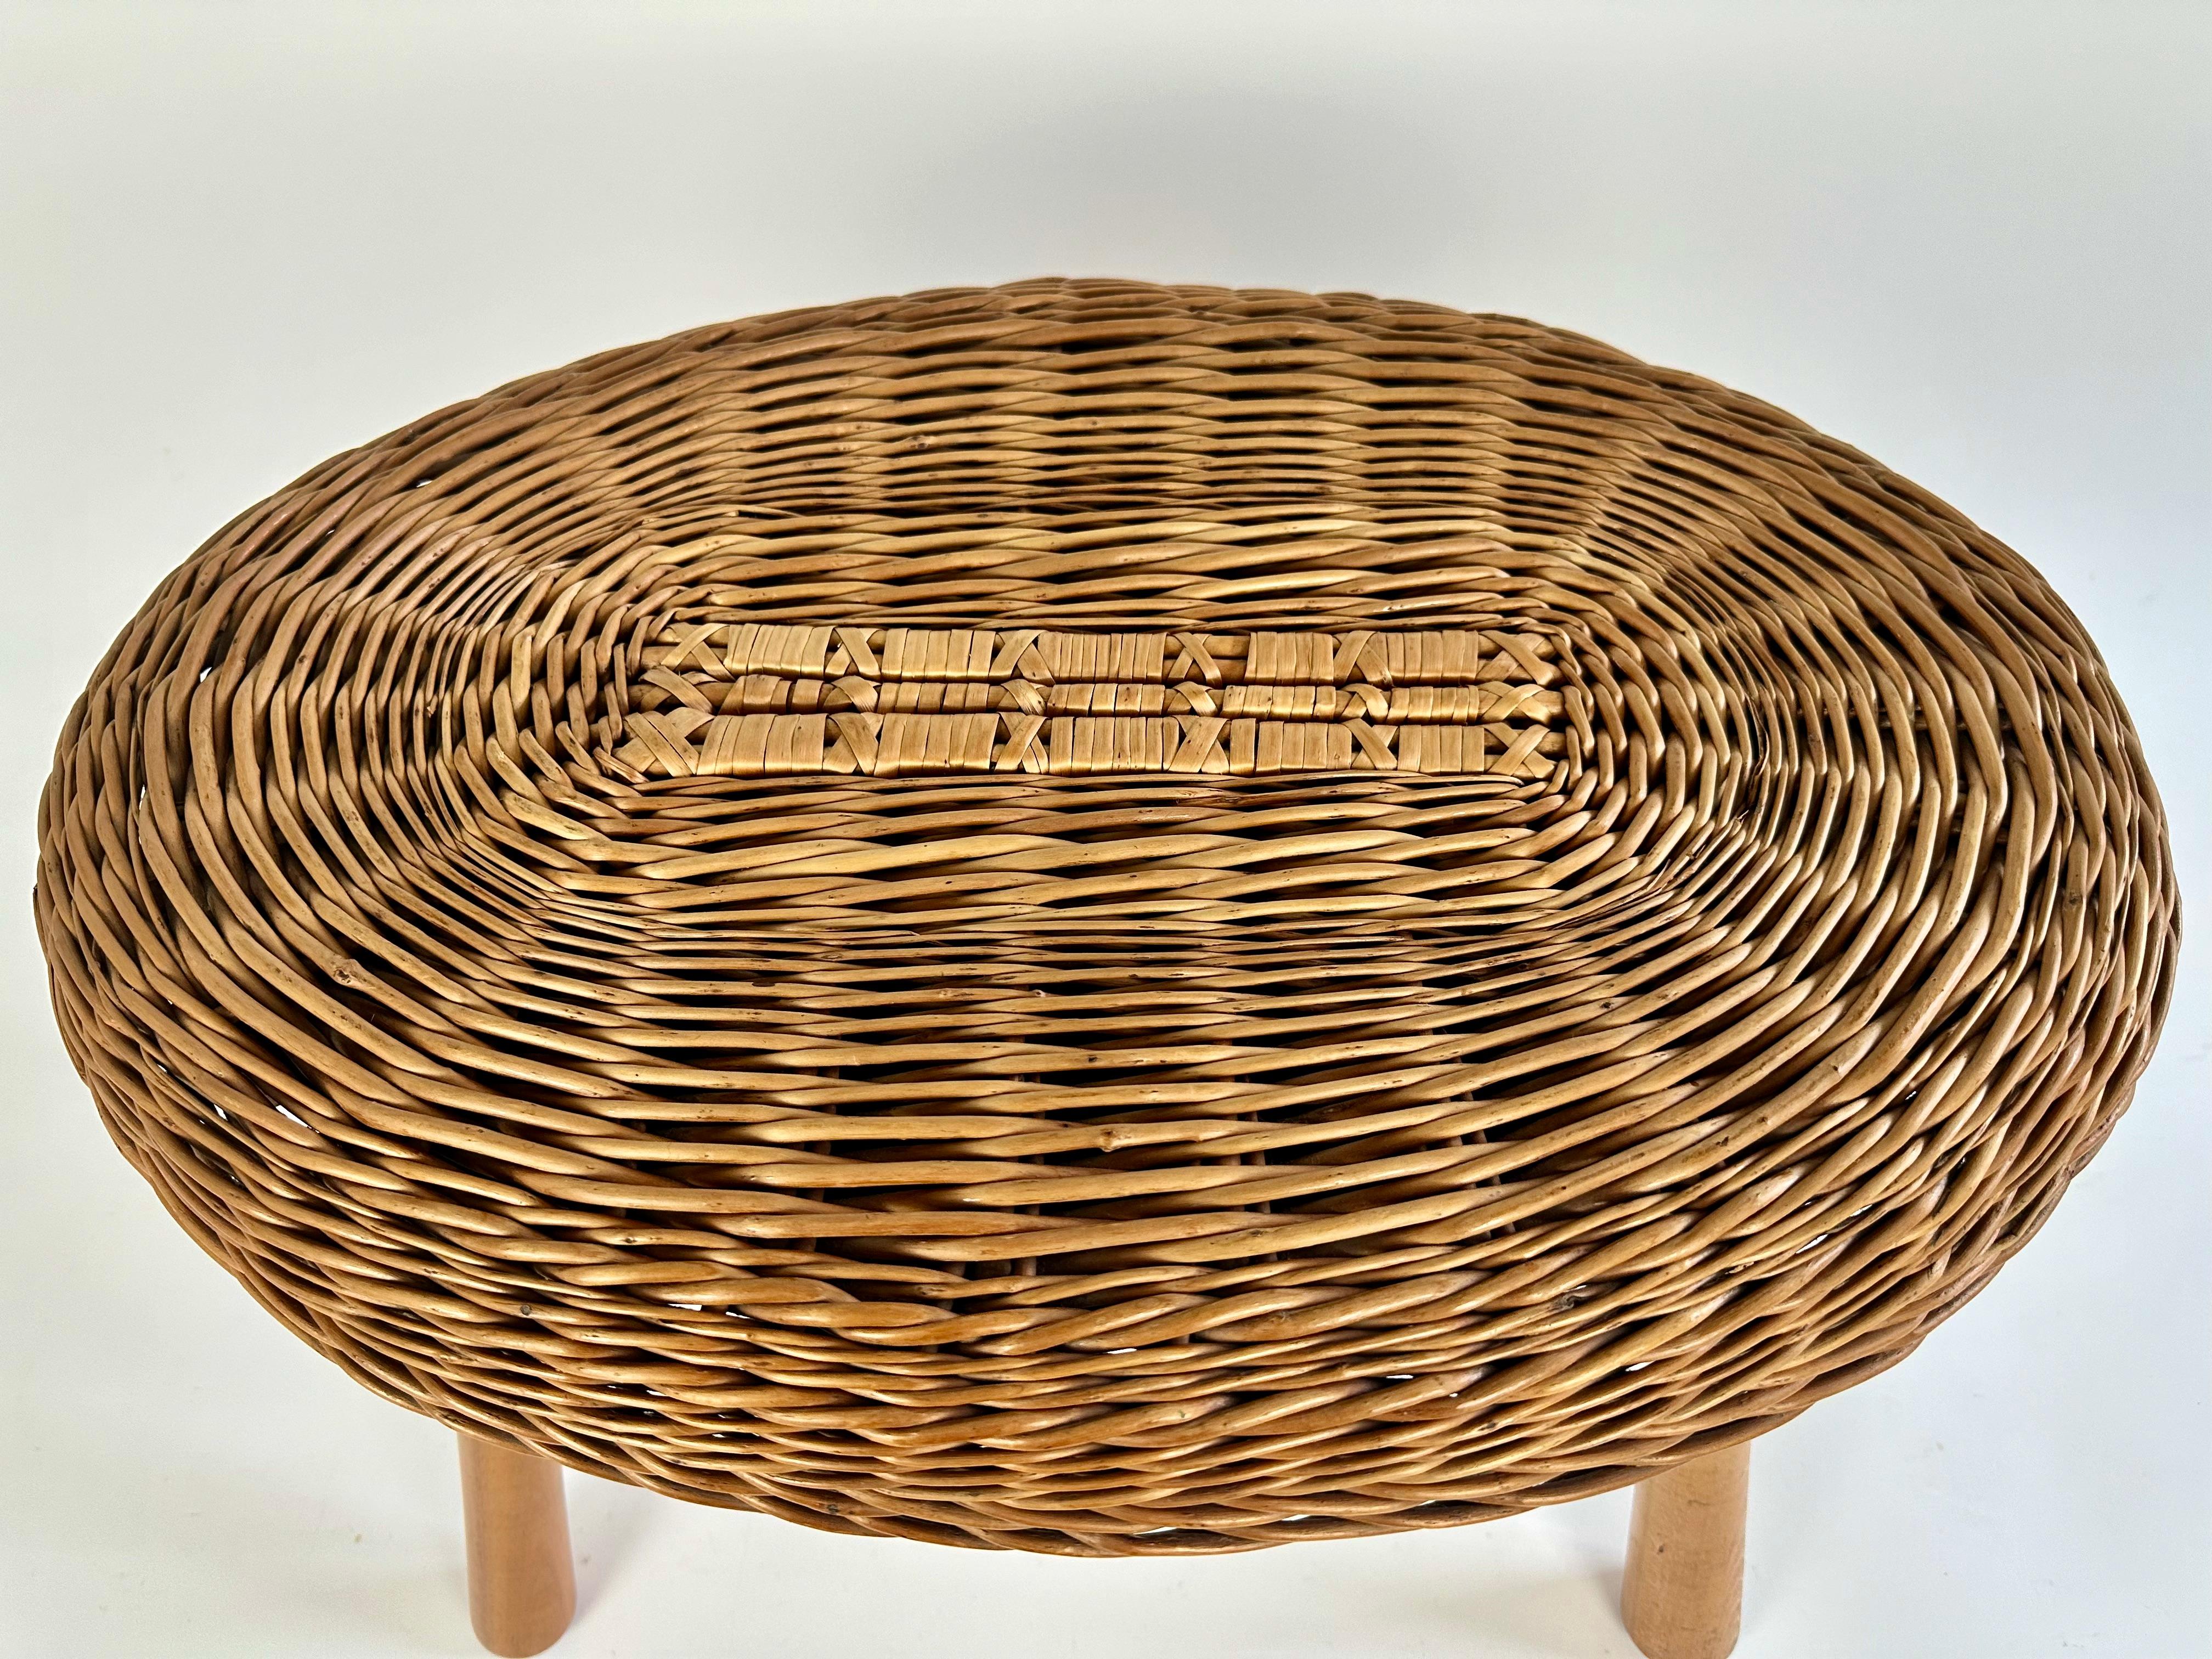 20th Century Vintage wicker side table in the manner of Tony Paul, England c. 1950-60